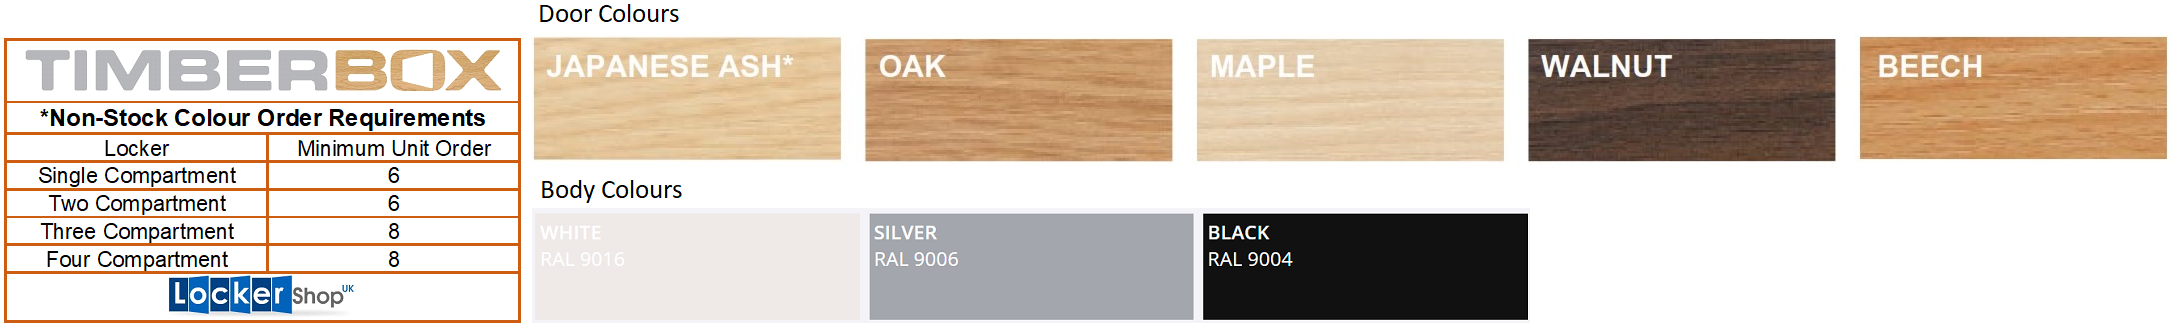 Timberbox Colours